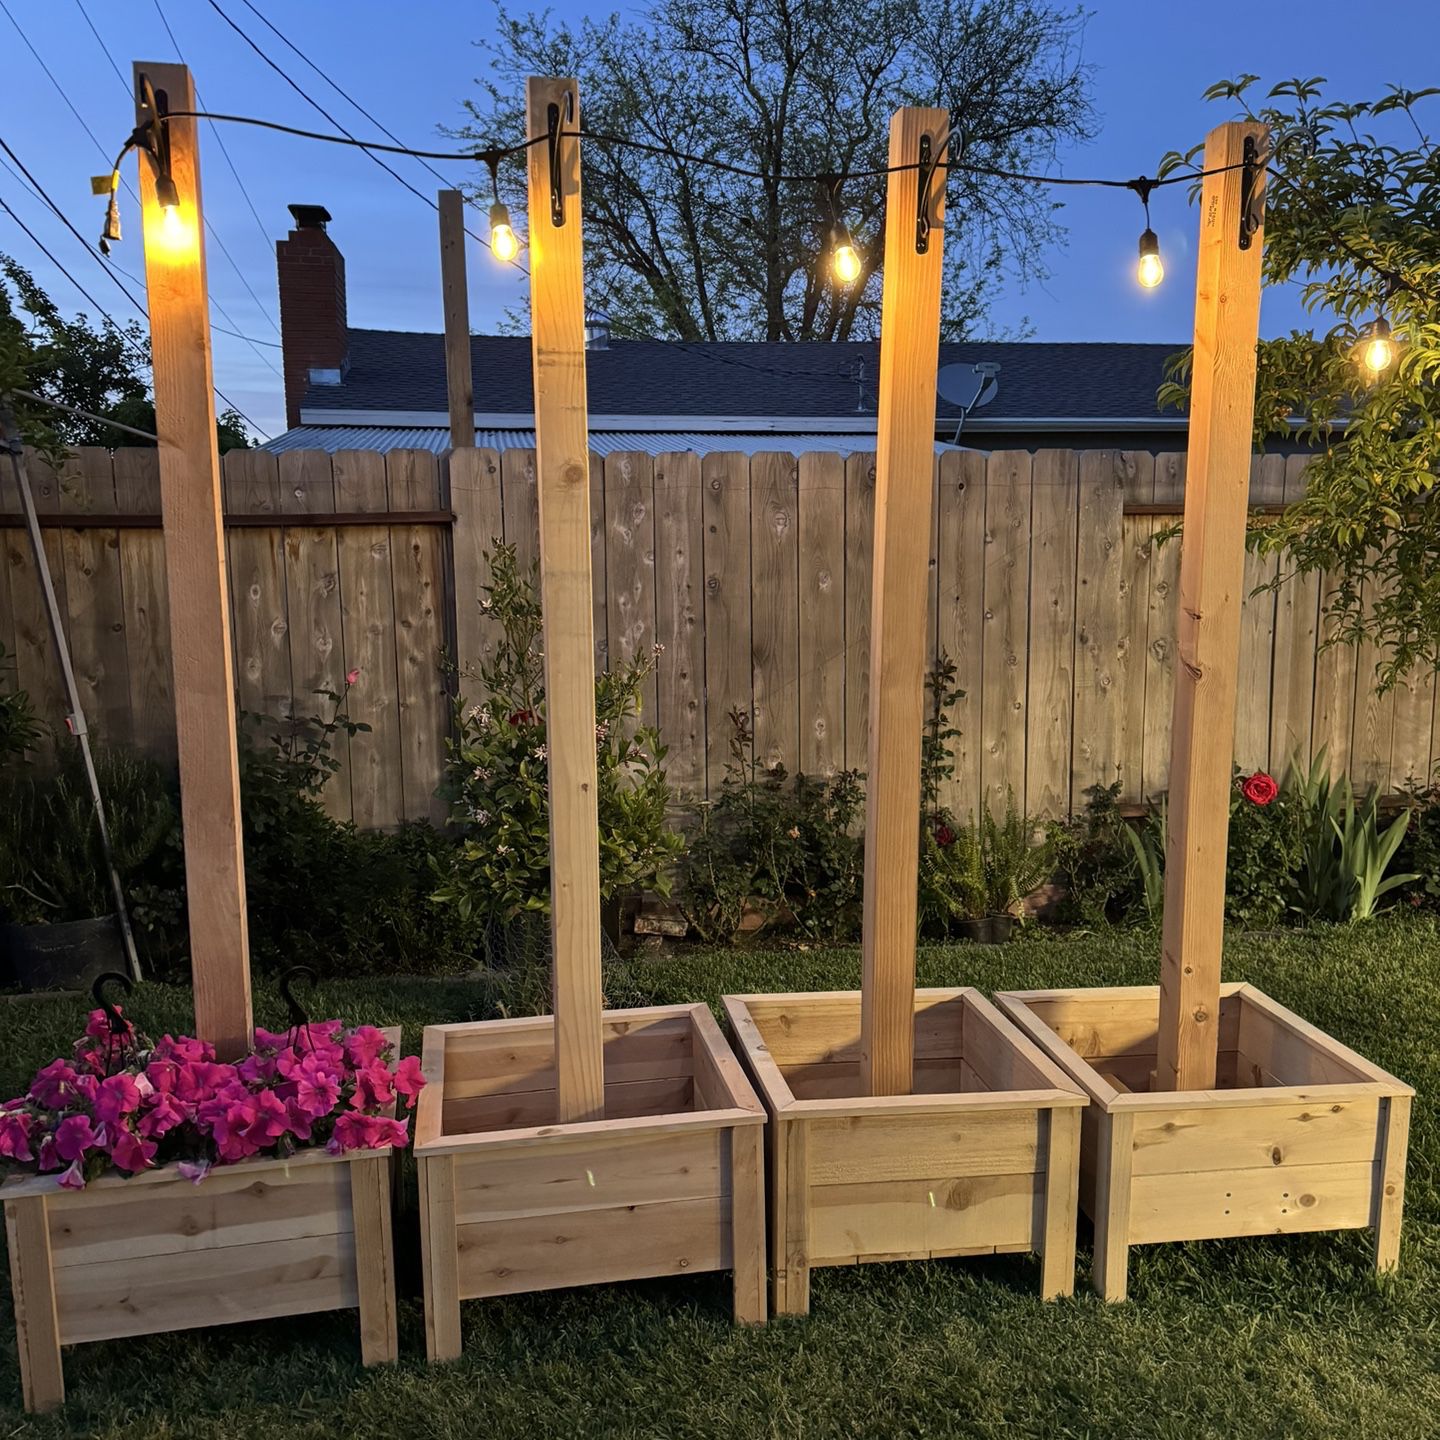 $80 Each Planter  Post For Lights And Hanging Plants